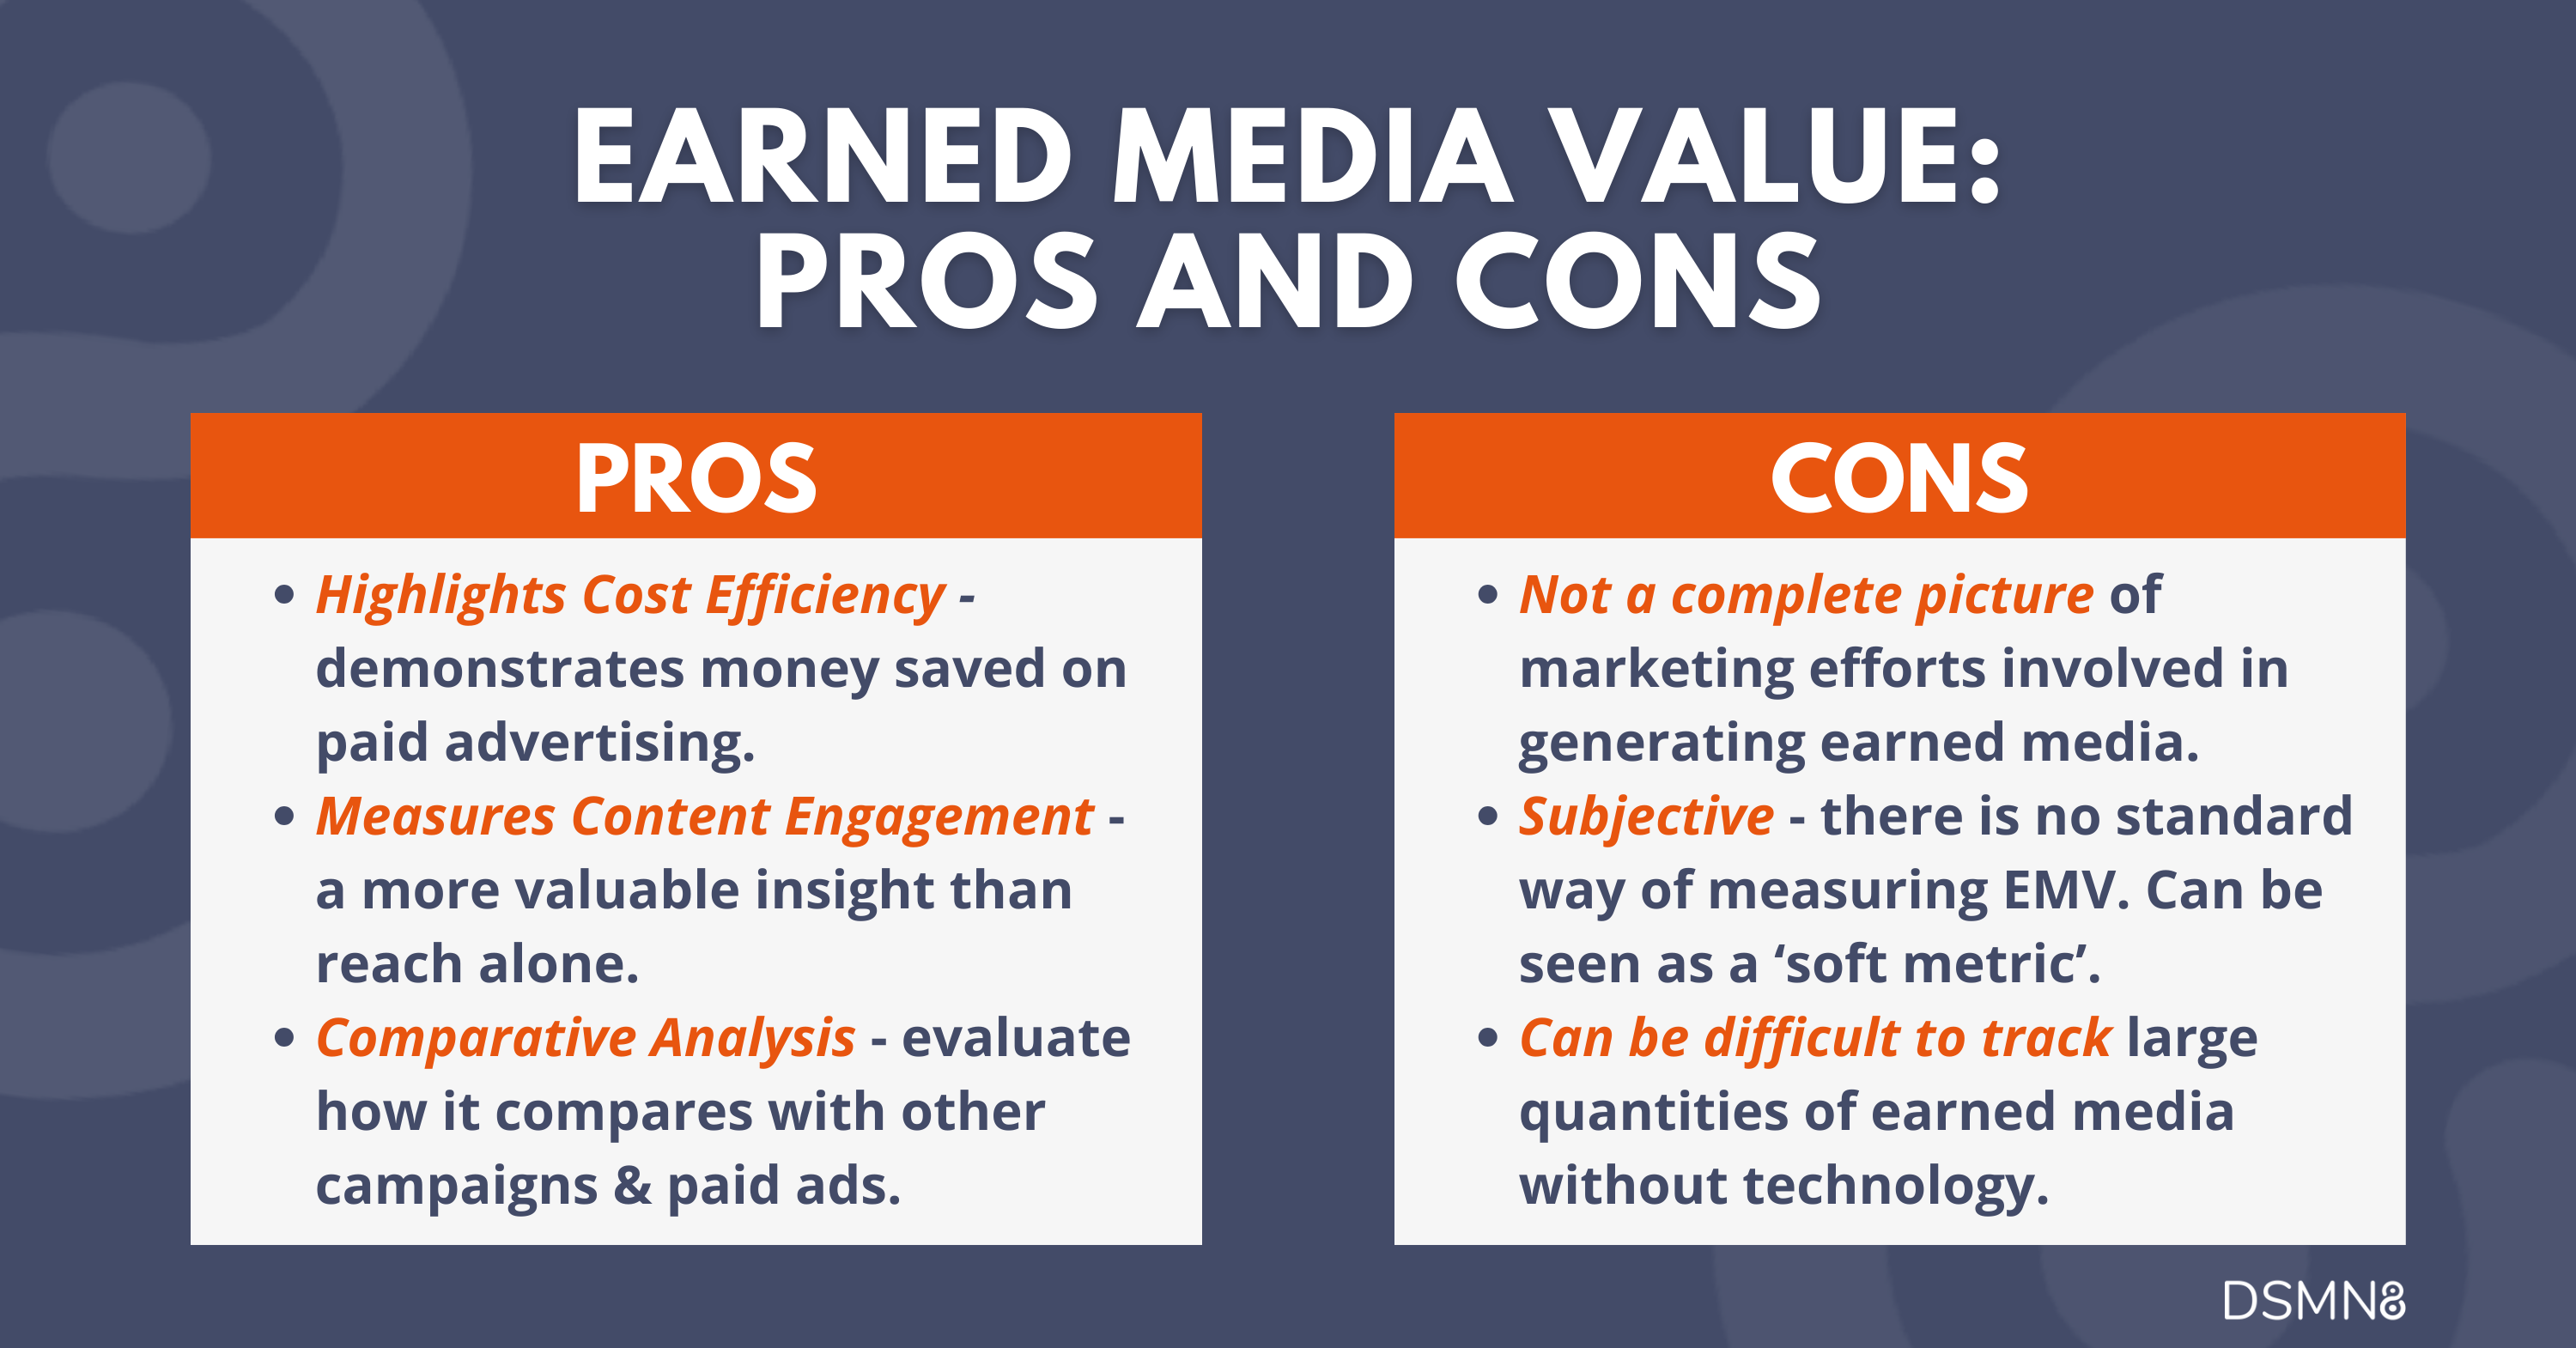 earned media value pros and cons